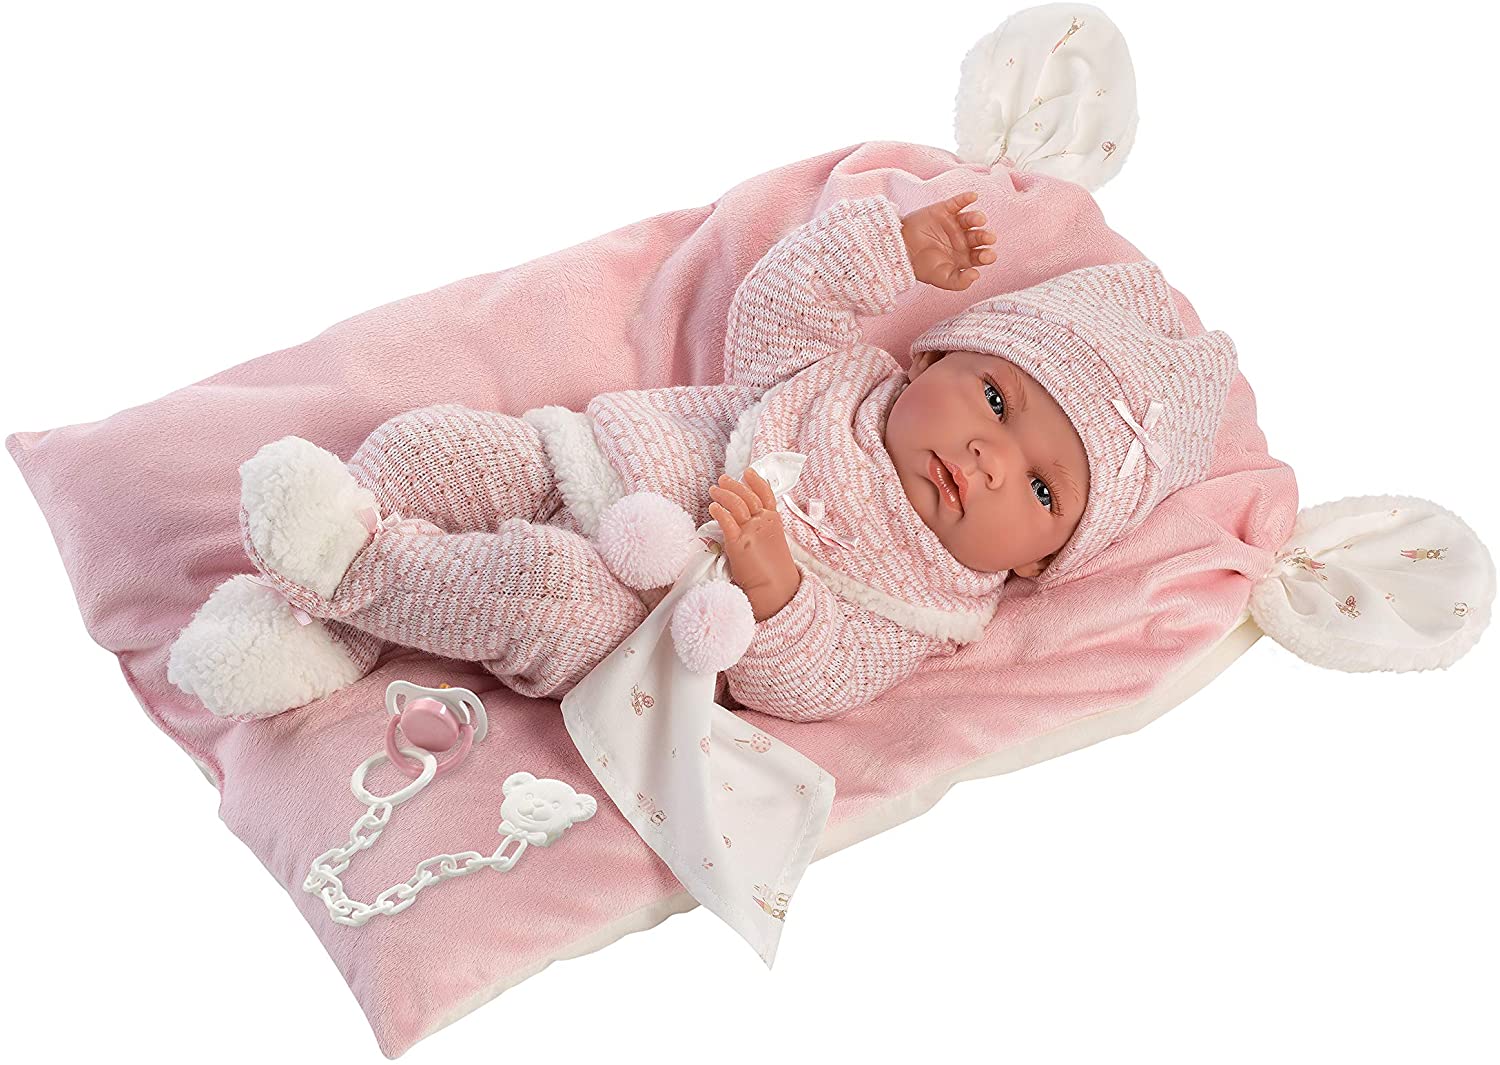 Llorens Nica Doll with Blue Eyes and Vinyl Body Baby Doll Including Pink Cuddly 